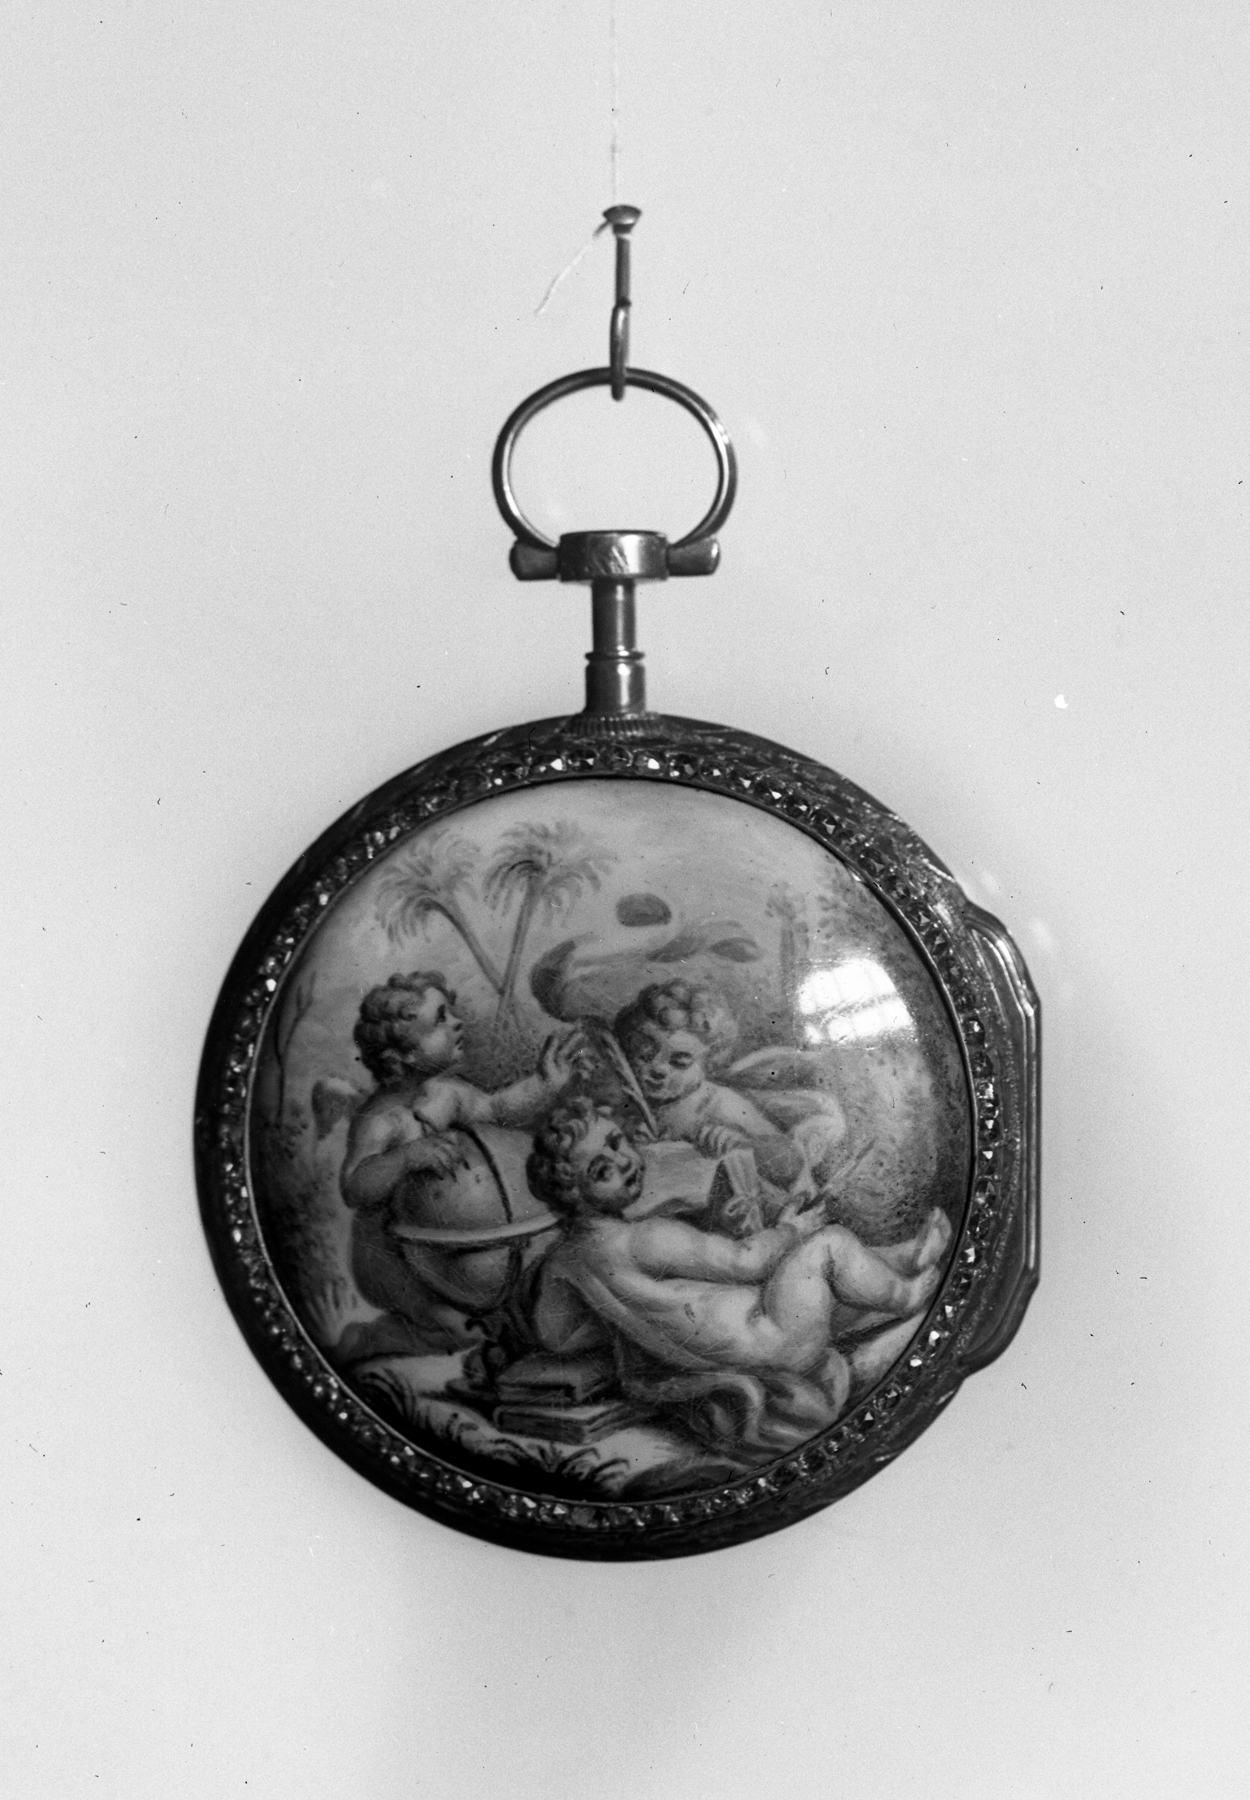 Image for Watch with a painted enamel scene of putti and a child in a landscape